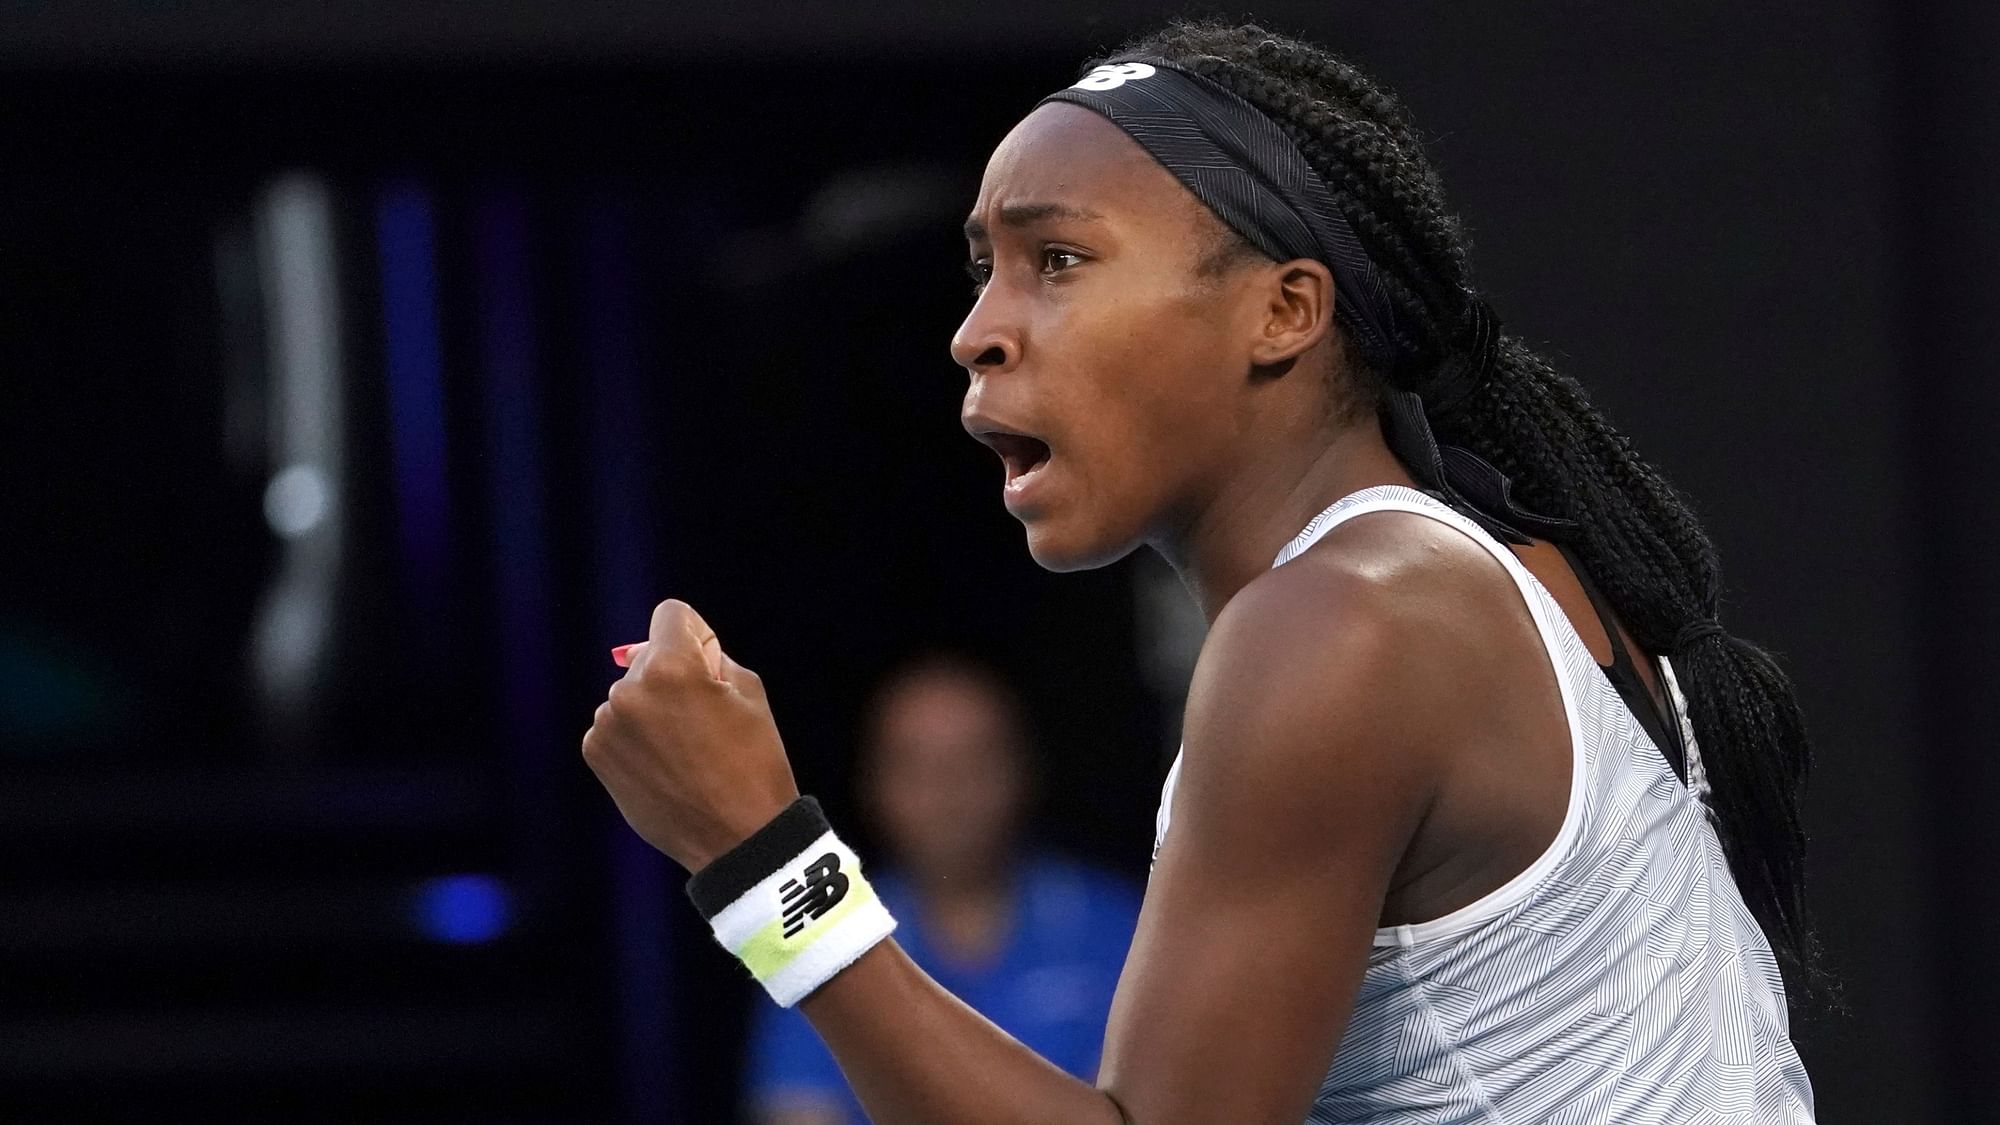 Coco Gauff, the 15-year-old rising American star, will make her first appearance at the BNP Paribas Open, joining all the top 75-ranked men’s and women’s players in the world.